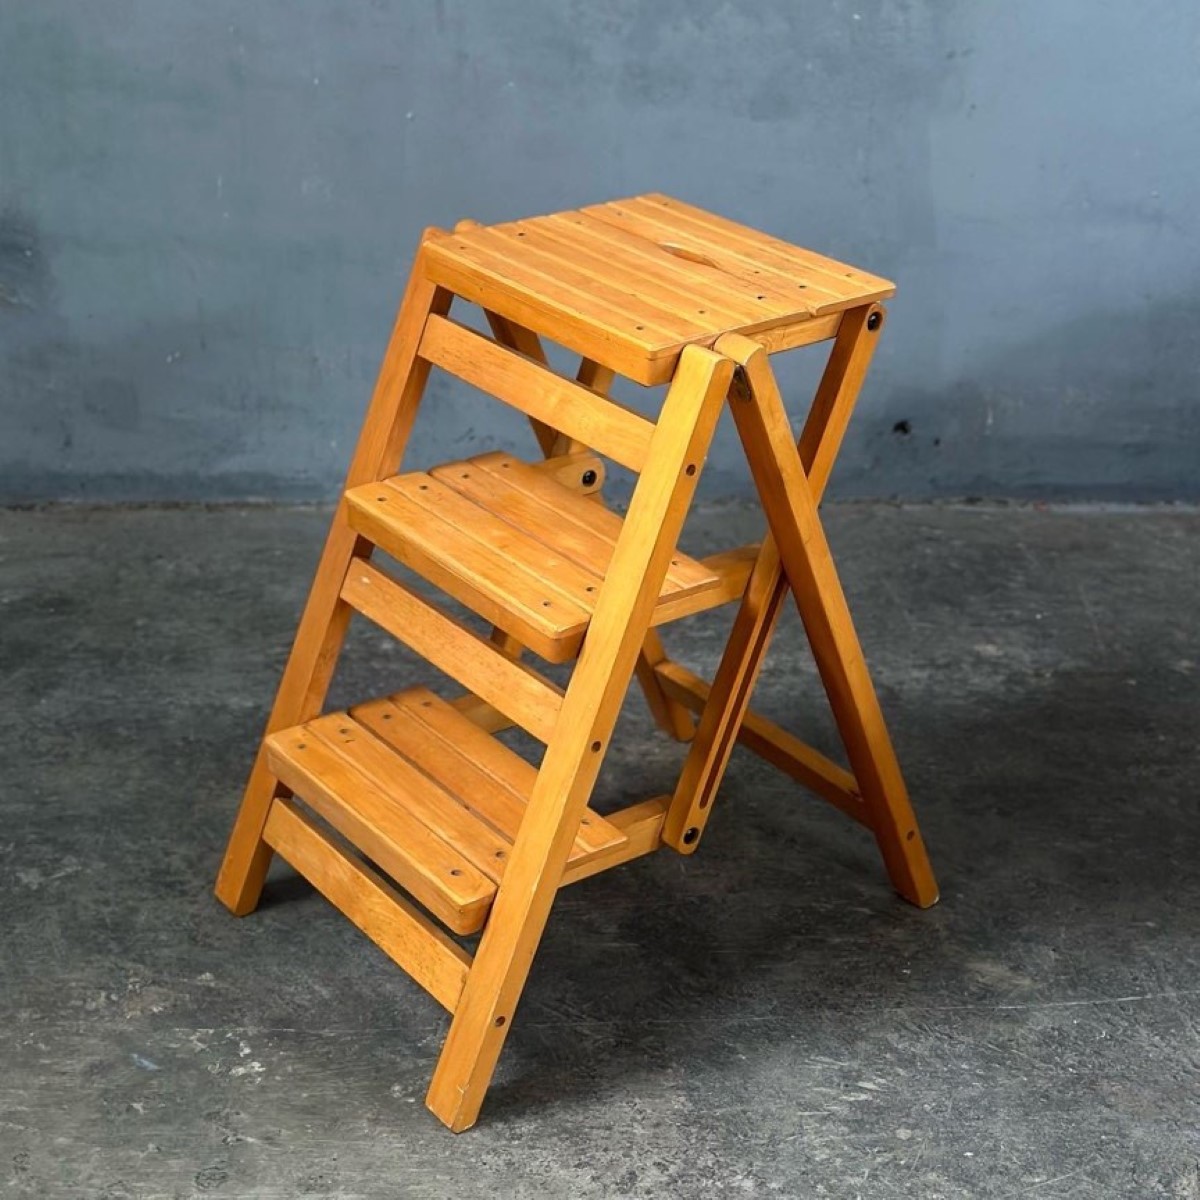 Where Can I Buy A Wooden Step Ladder